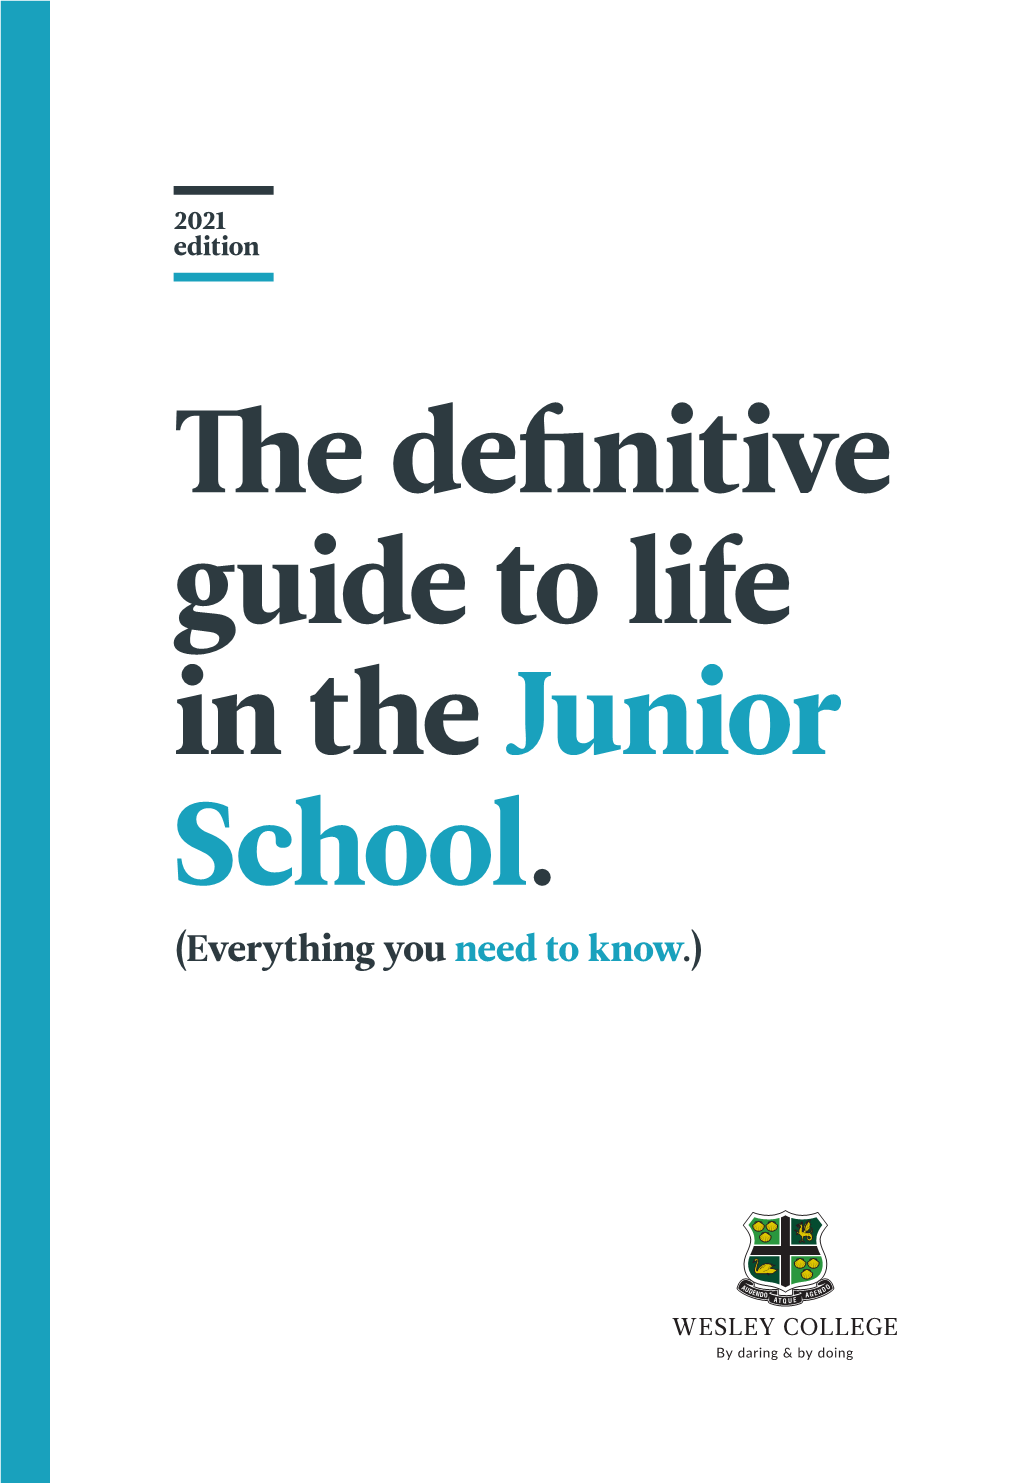 The Definitive Guide to Life in the Junior School. (Everything You Need to Know.) Welcome to Wesley College Junior School